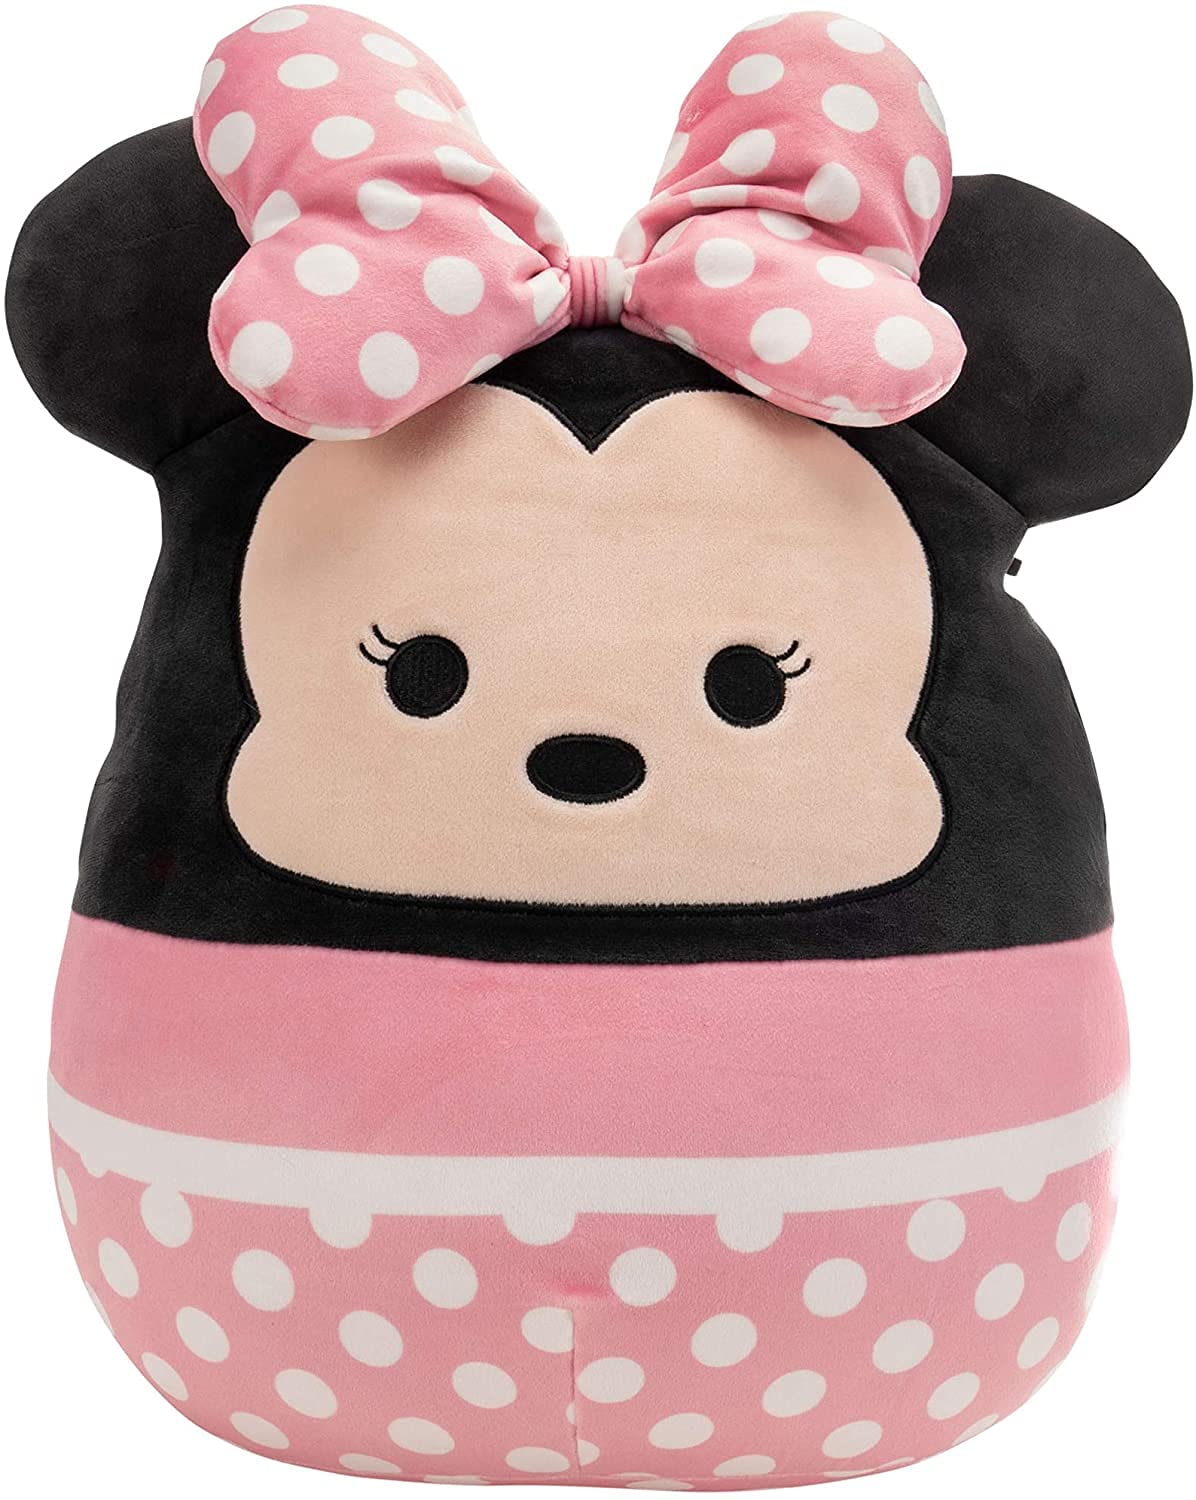 SQUISHMALLOW KellyToy - Disney Minnie Mouse - 8 Inch (20cm) - Official Licensed Product - Exclusive Disney 2021 Squad